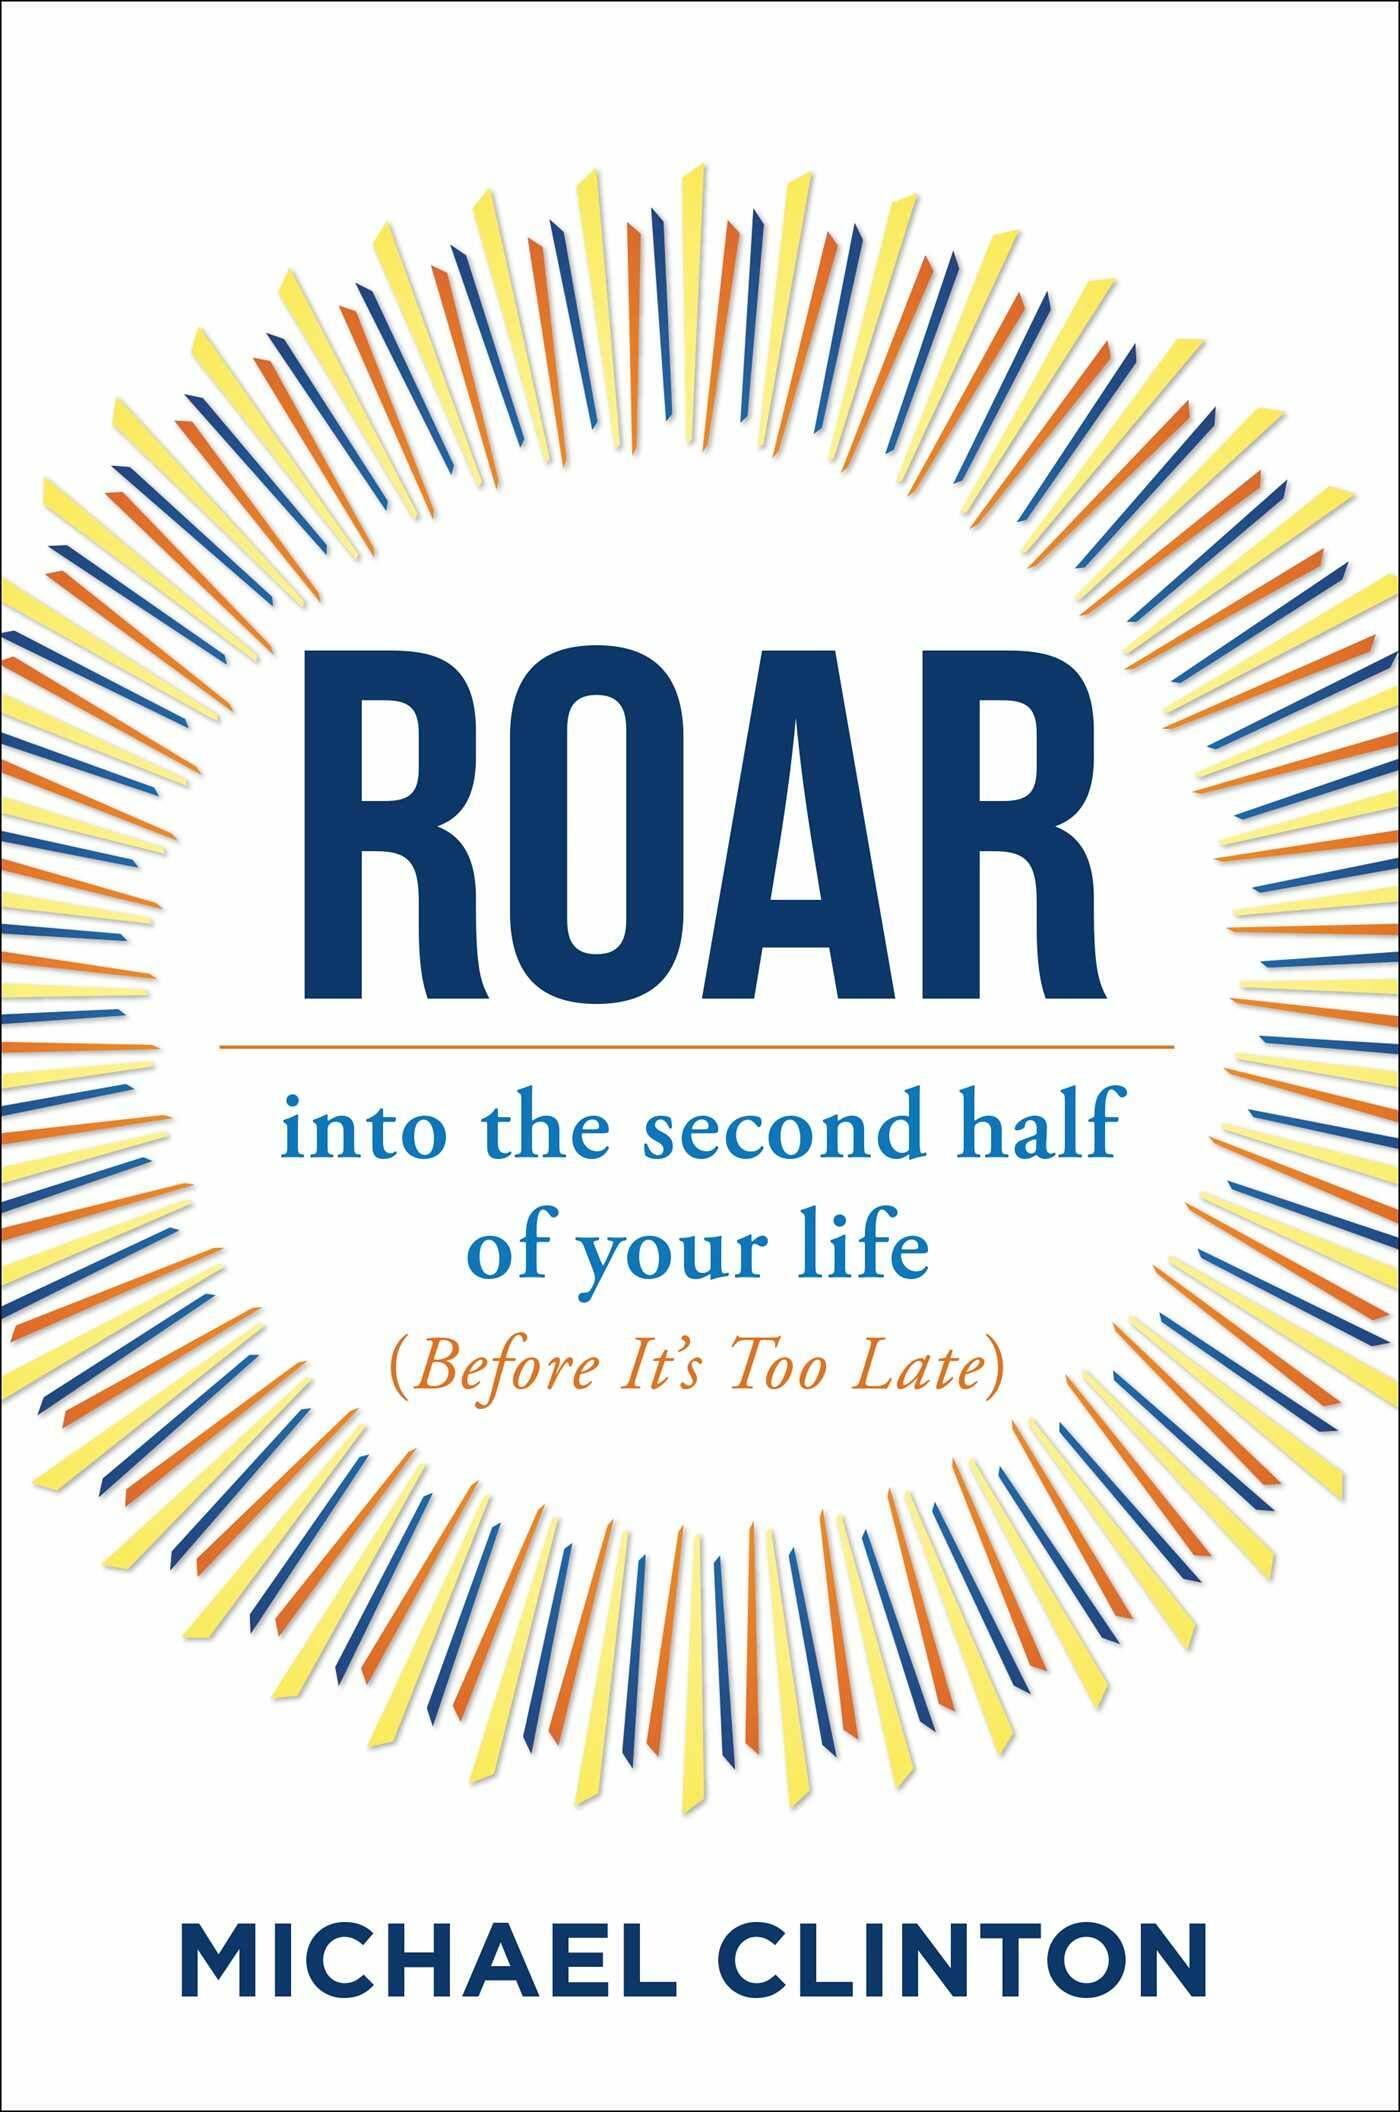 Michael Clinton discusses his book “Roar: Into the Second Half of Your Life (Before It’s Too Late)” on July 15.